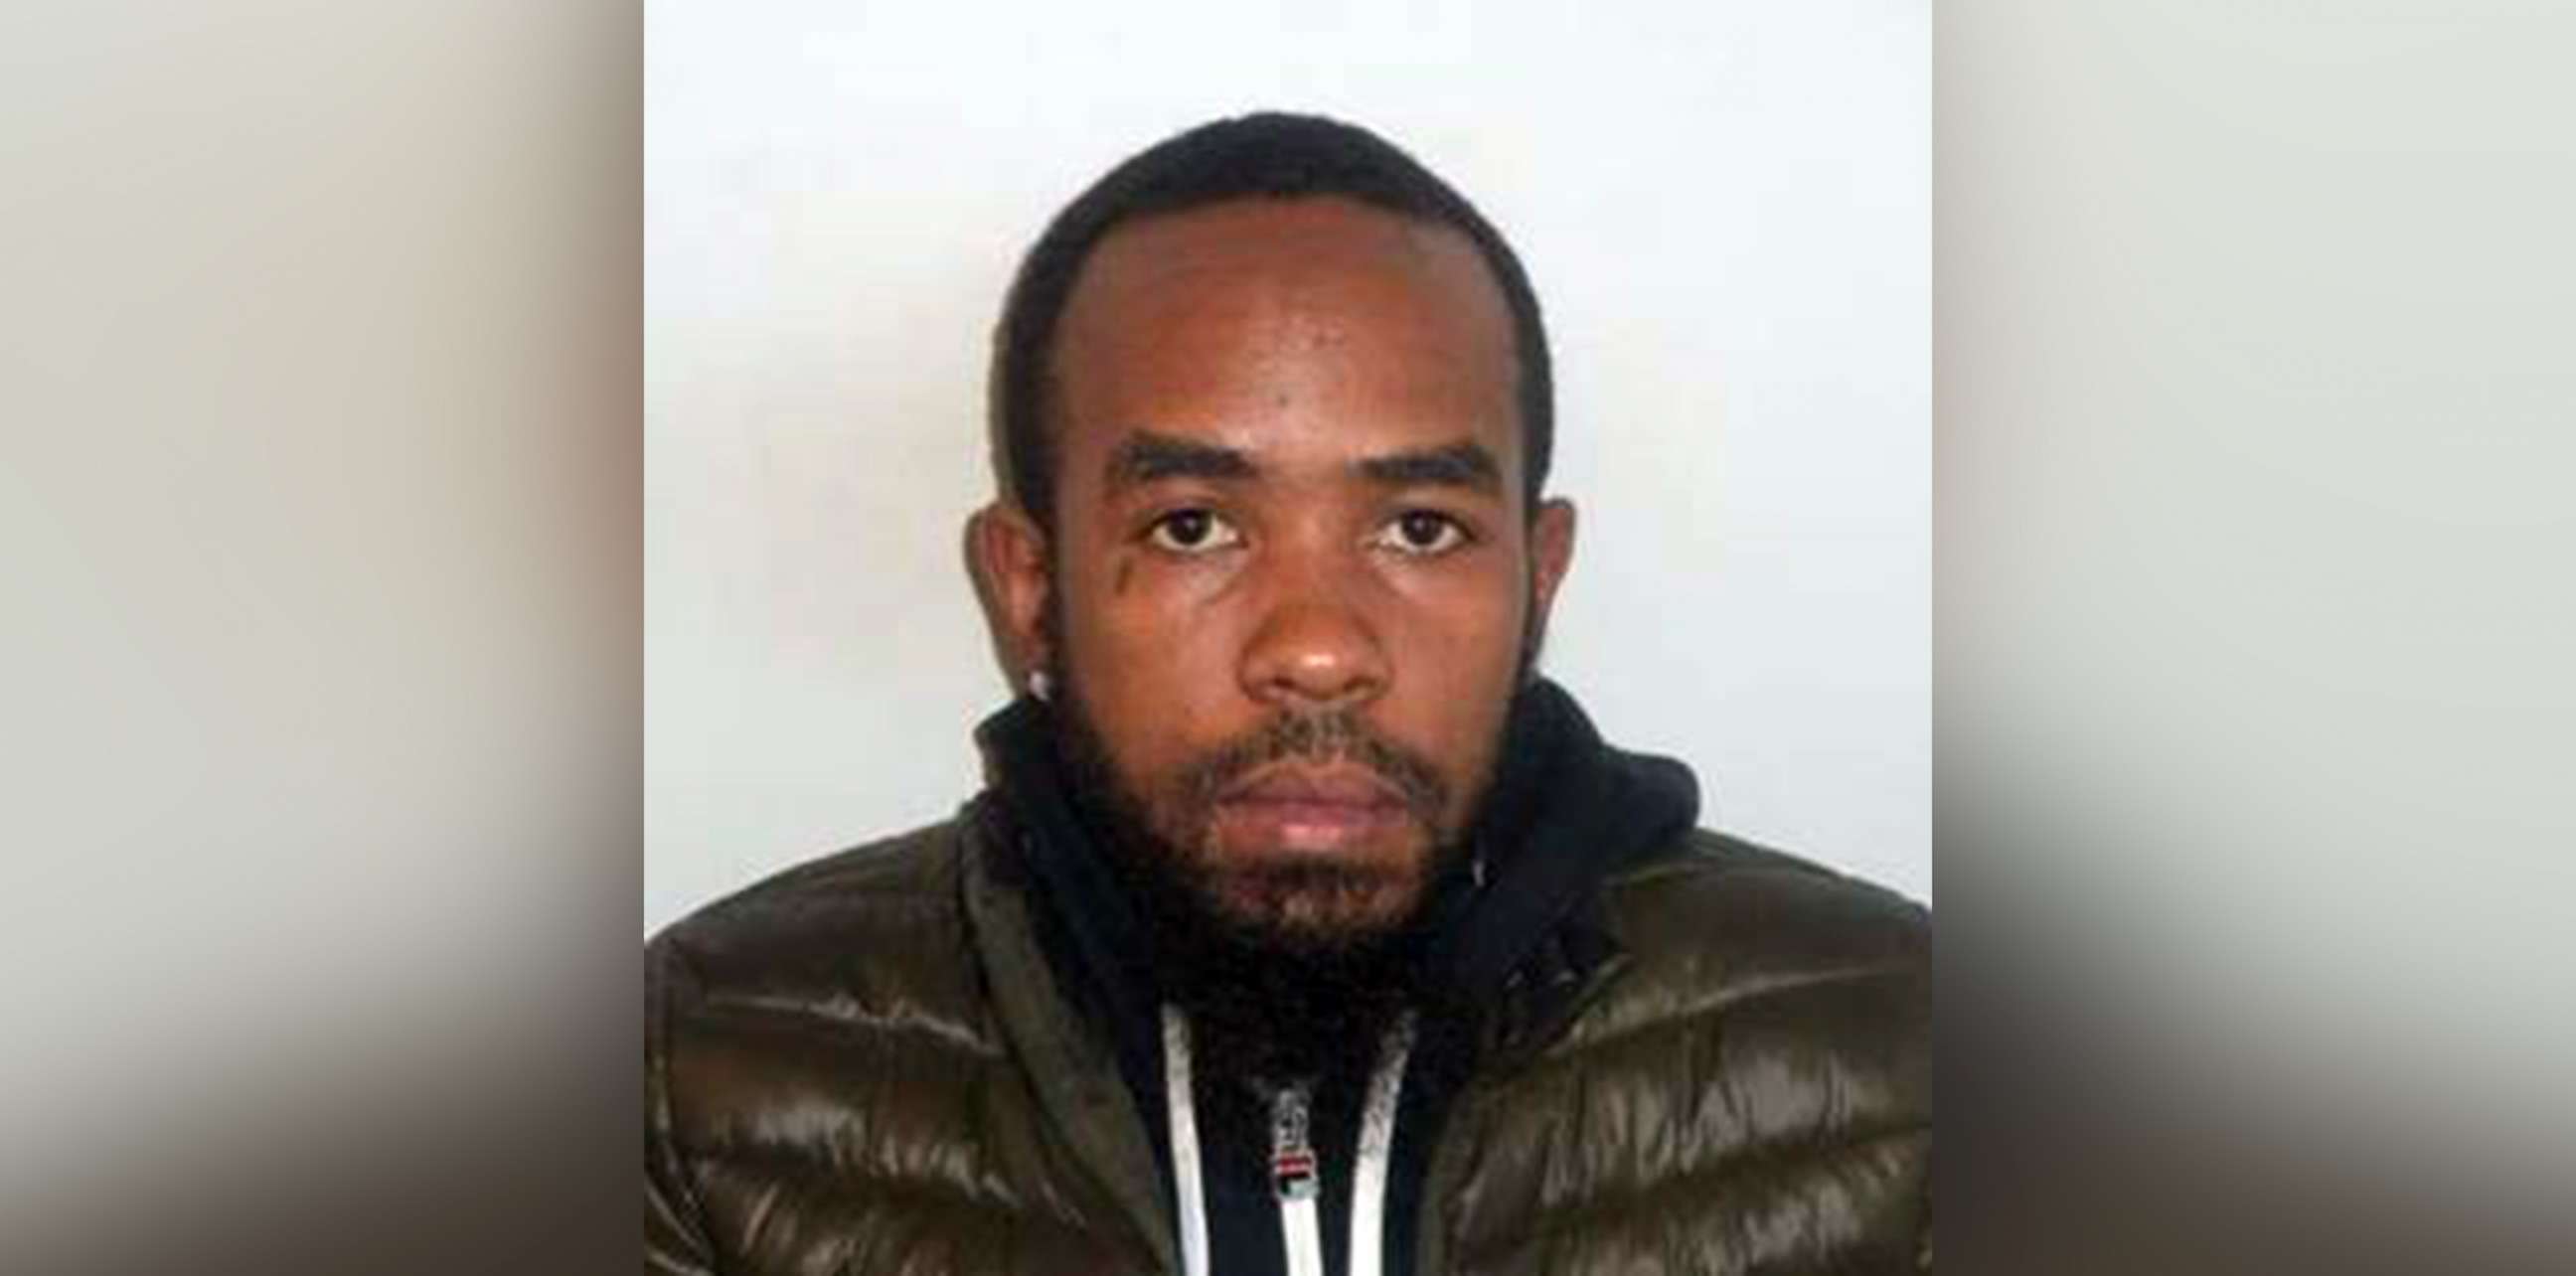 PHOTO: Ricoh McClain, 30, is pictured in an undated photo released by the Prince George’s County Police Department on Nov. 12, 2019.